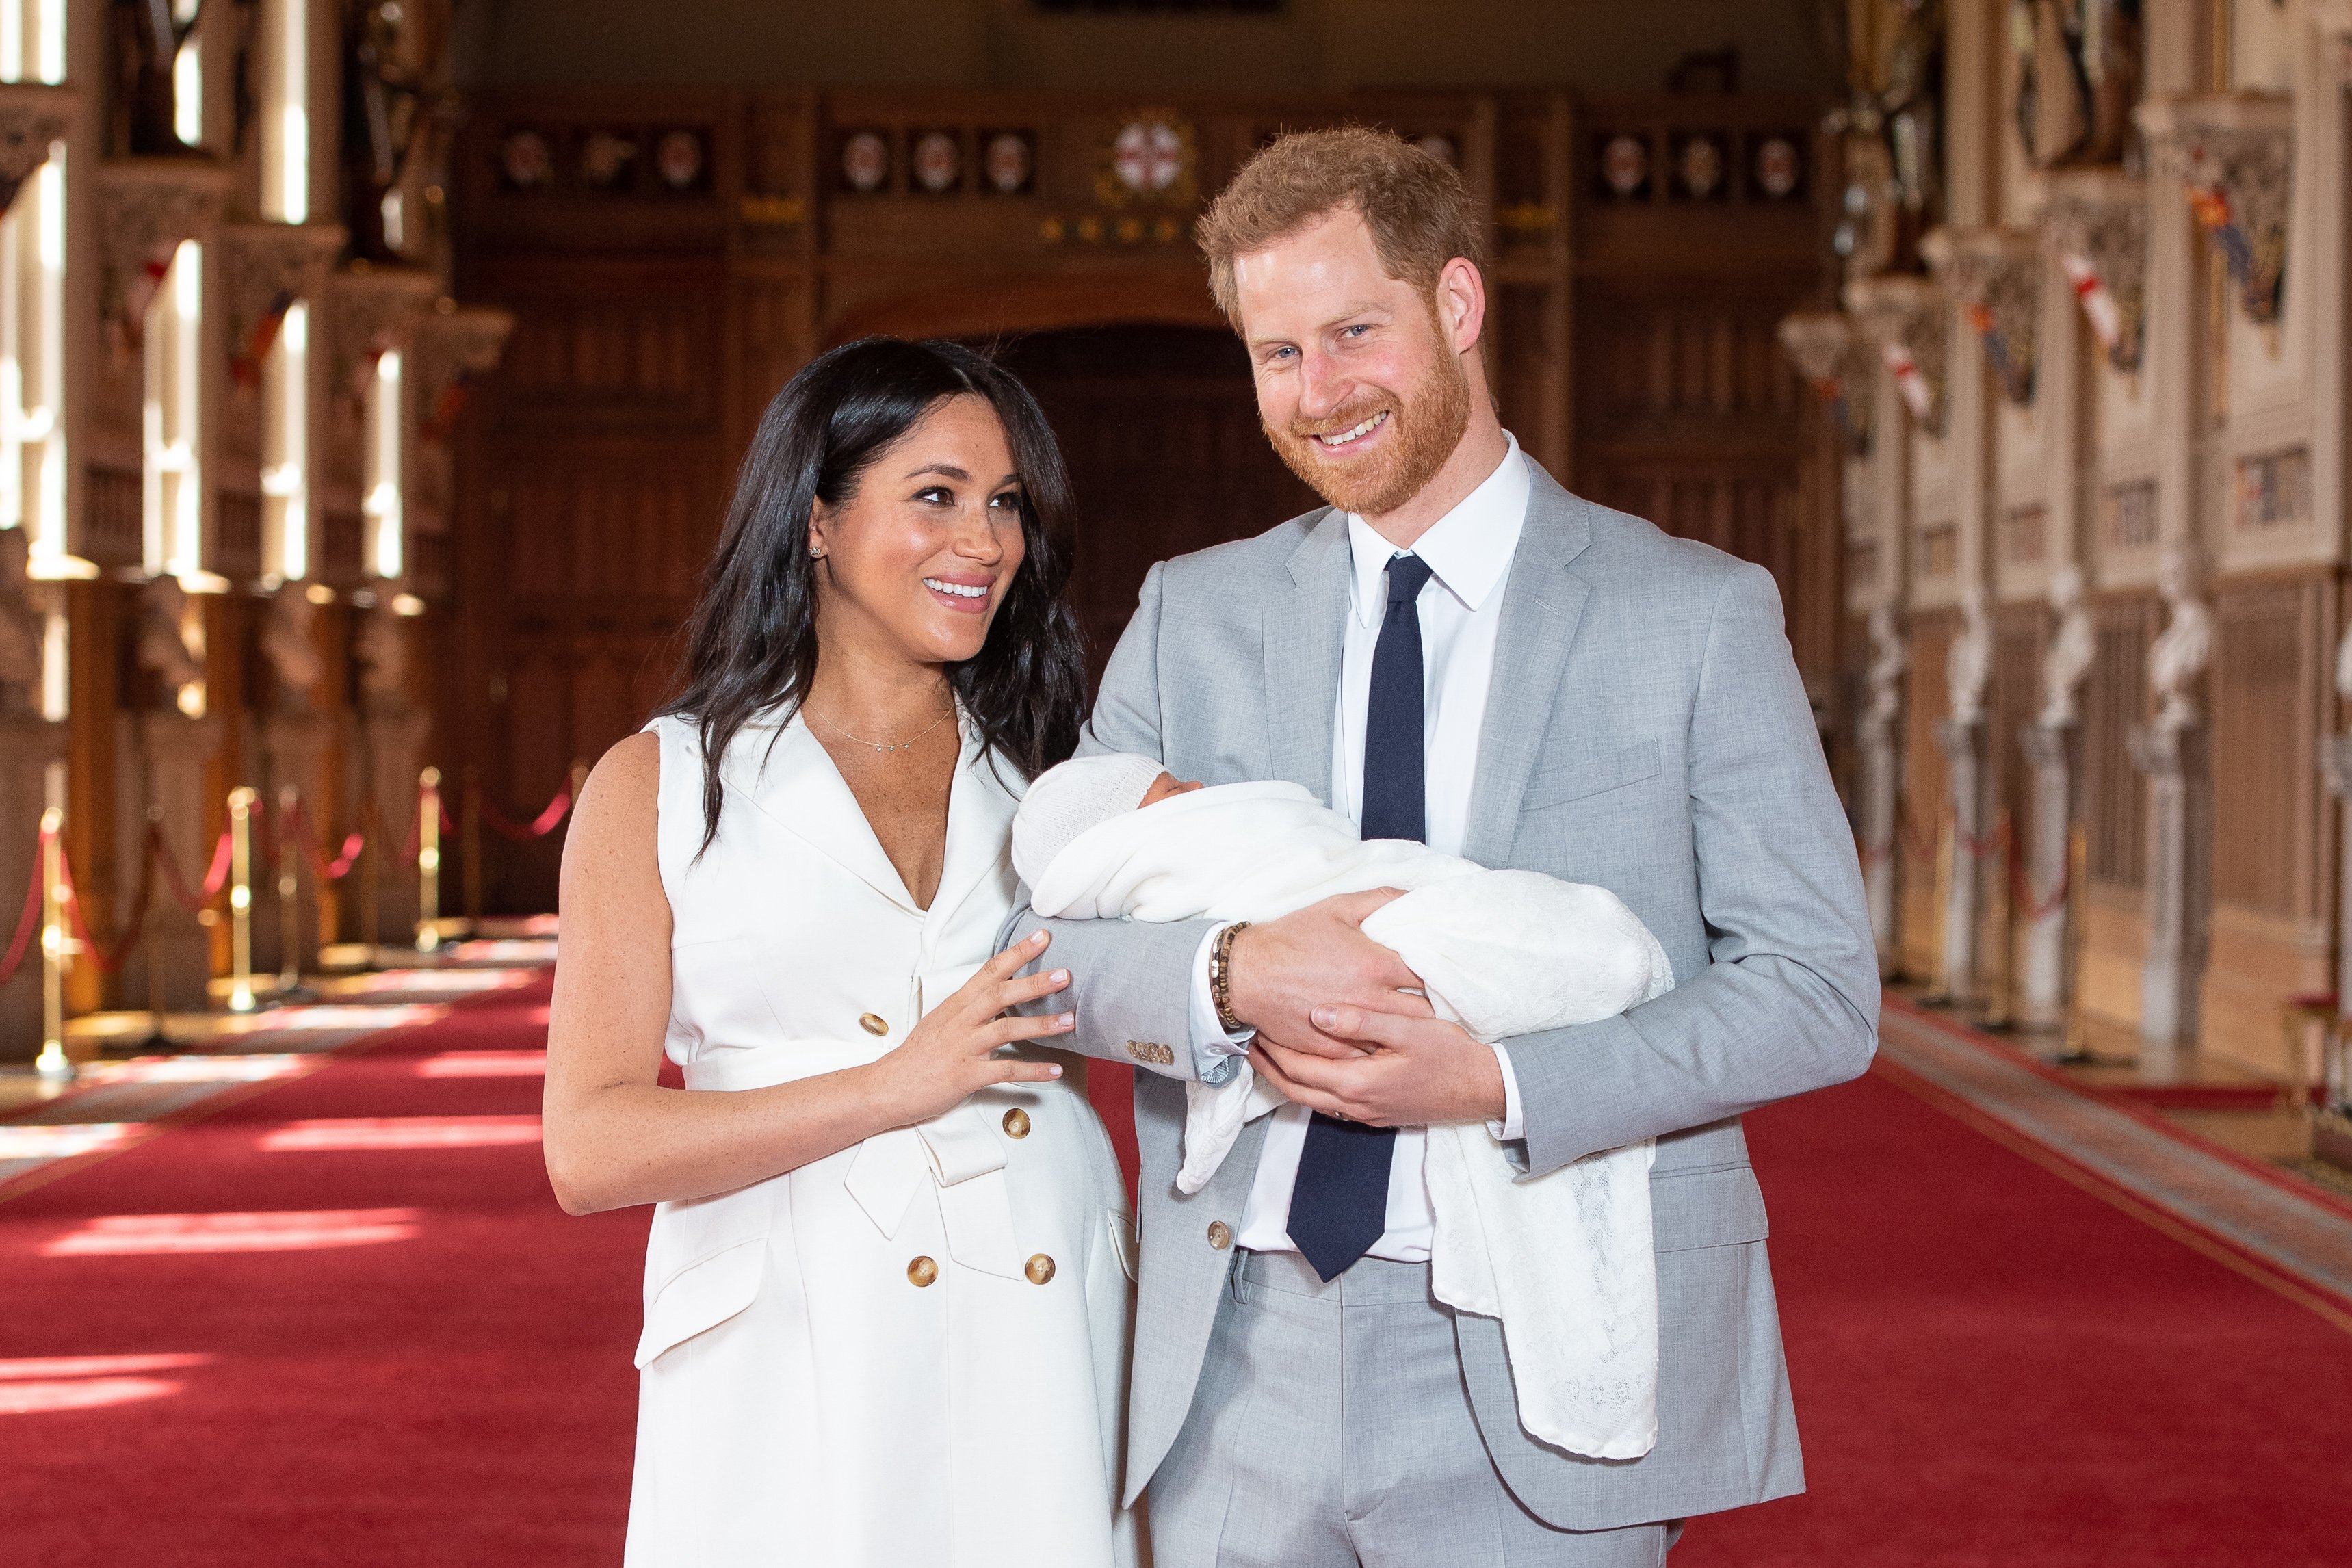 Prince Harry and Meghan Markle pose holding newborn Archie Harrison Mountbatten-Windsor at Windsor Castle on May 8, 2019 in Windsor, England. | Source: Getty Images